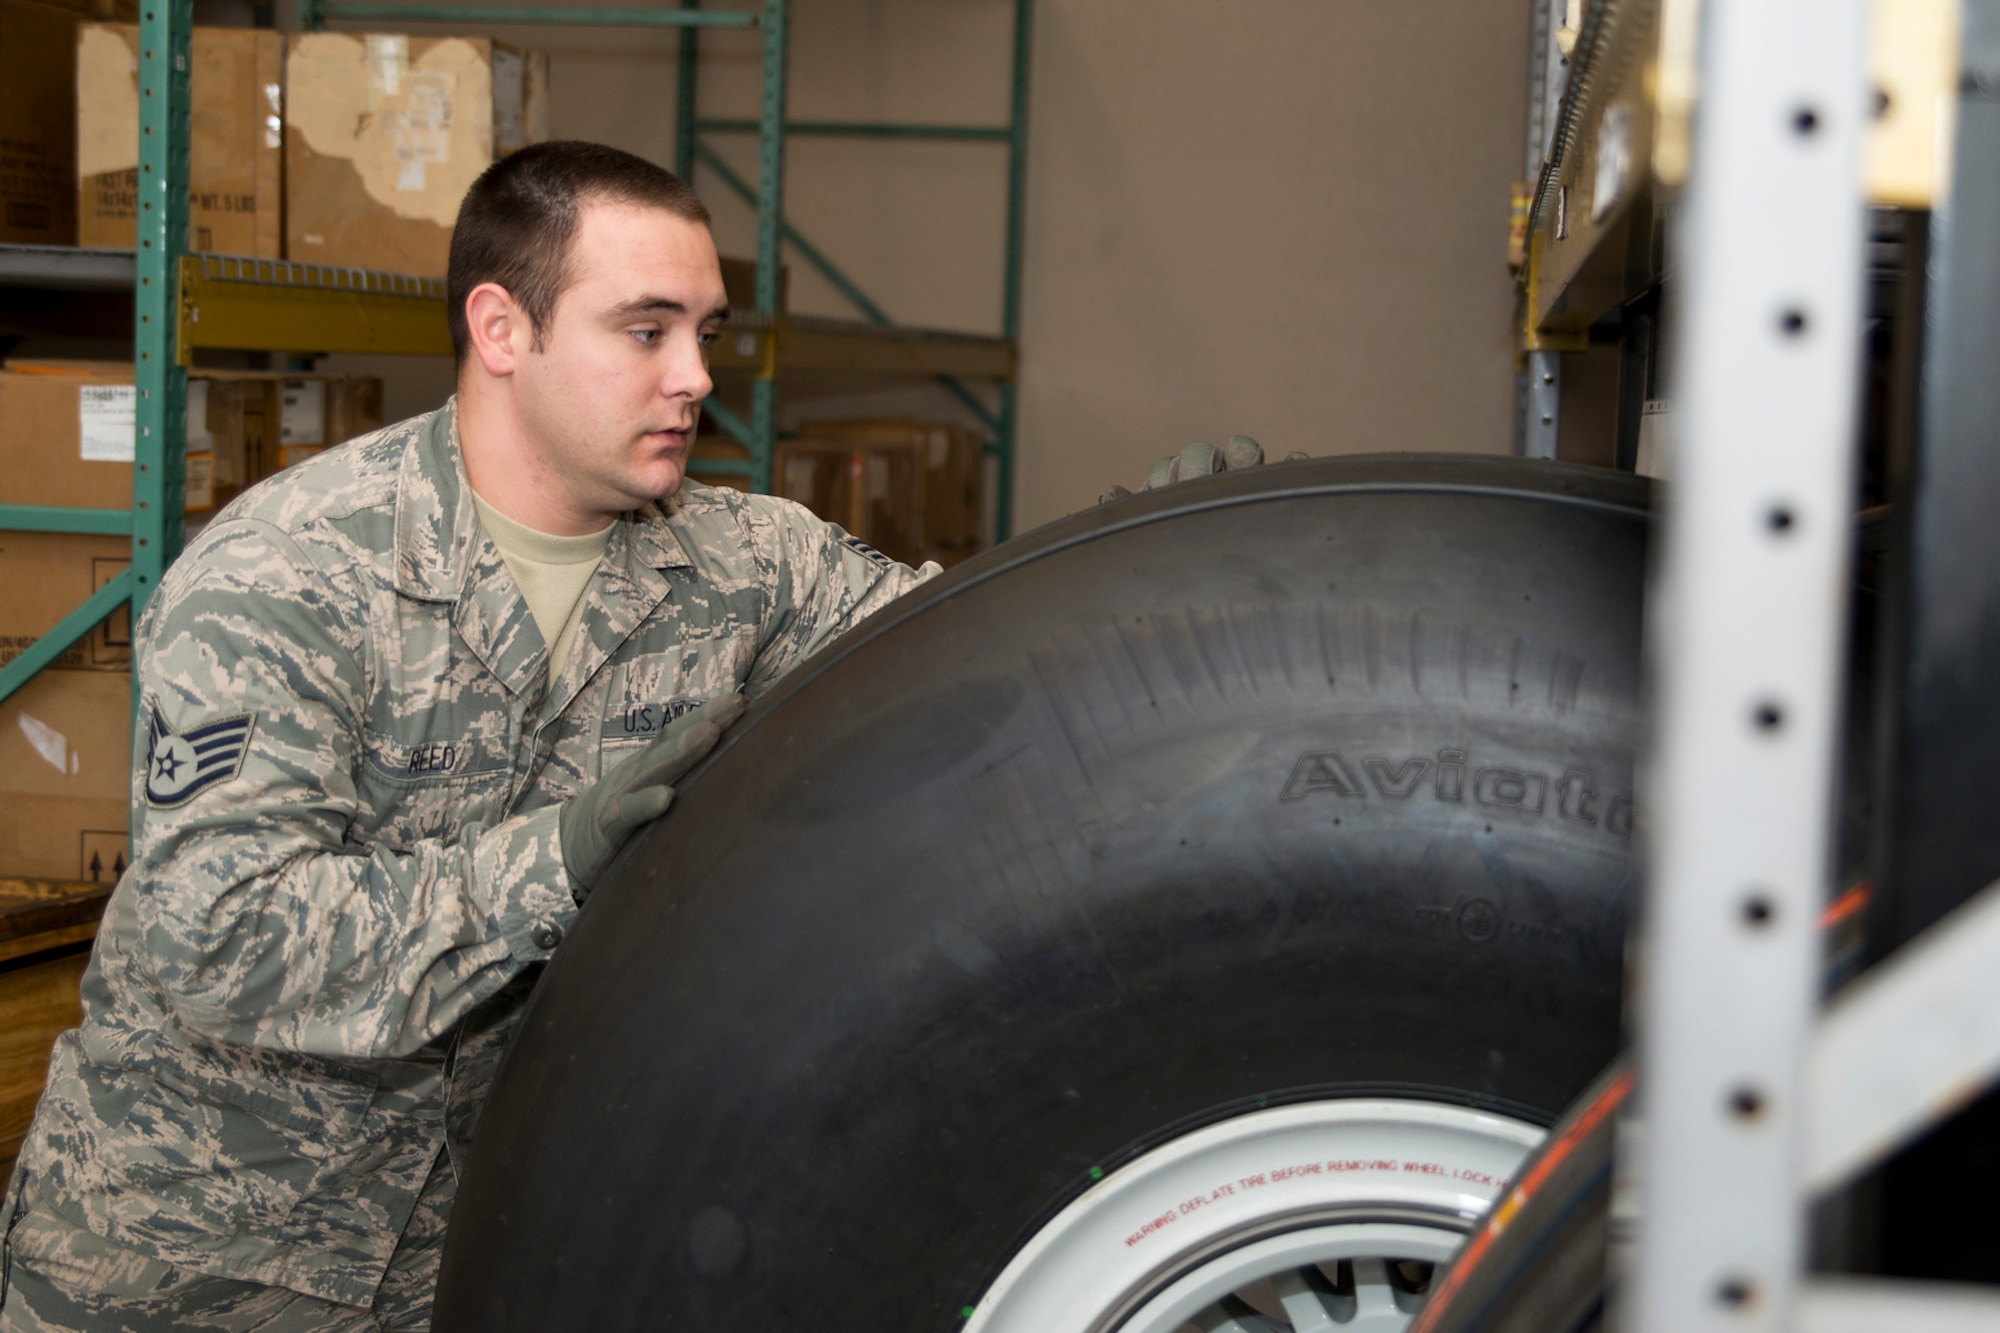 U.S. Air Force Staff Sgt. Michael Reed, an aircraft parts store craftsman assigned to the 913th Force Support Squadron/Supply, loads a C-130 main tire into a tire rack at Little Rock, Air Force Base, Ark., Dec. 21, 2015. The aircraft parts store is manned 24 hours a day with Airmen from the 19th Logistics Readiness Squadron and 913th FSS, and supplies parts for C-130 aircraft maintenance at Little Rock and for mission capable aircraft around the world.  (U.S. Air Force photo by Master Sgt. Jeff Walston)